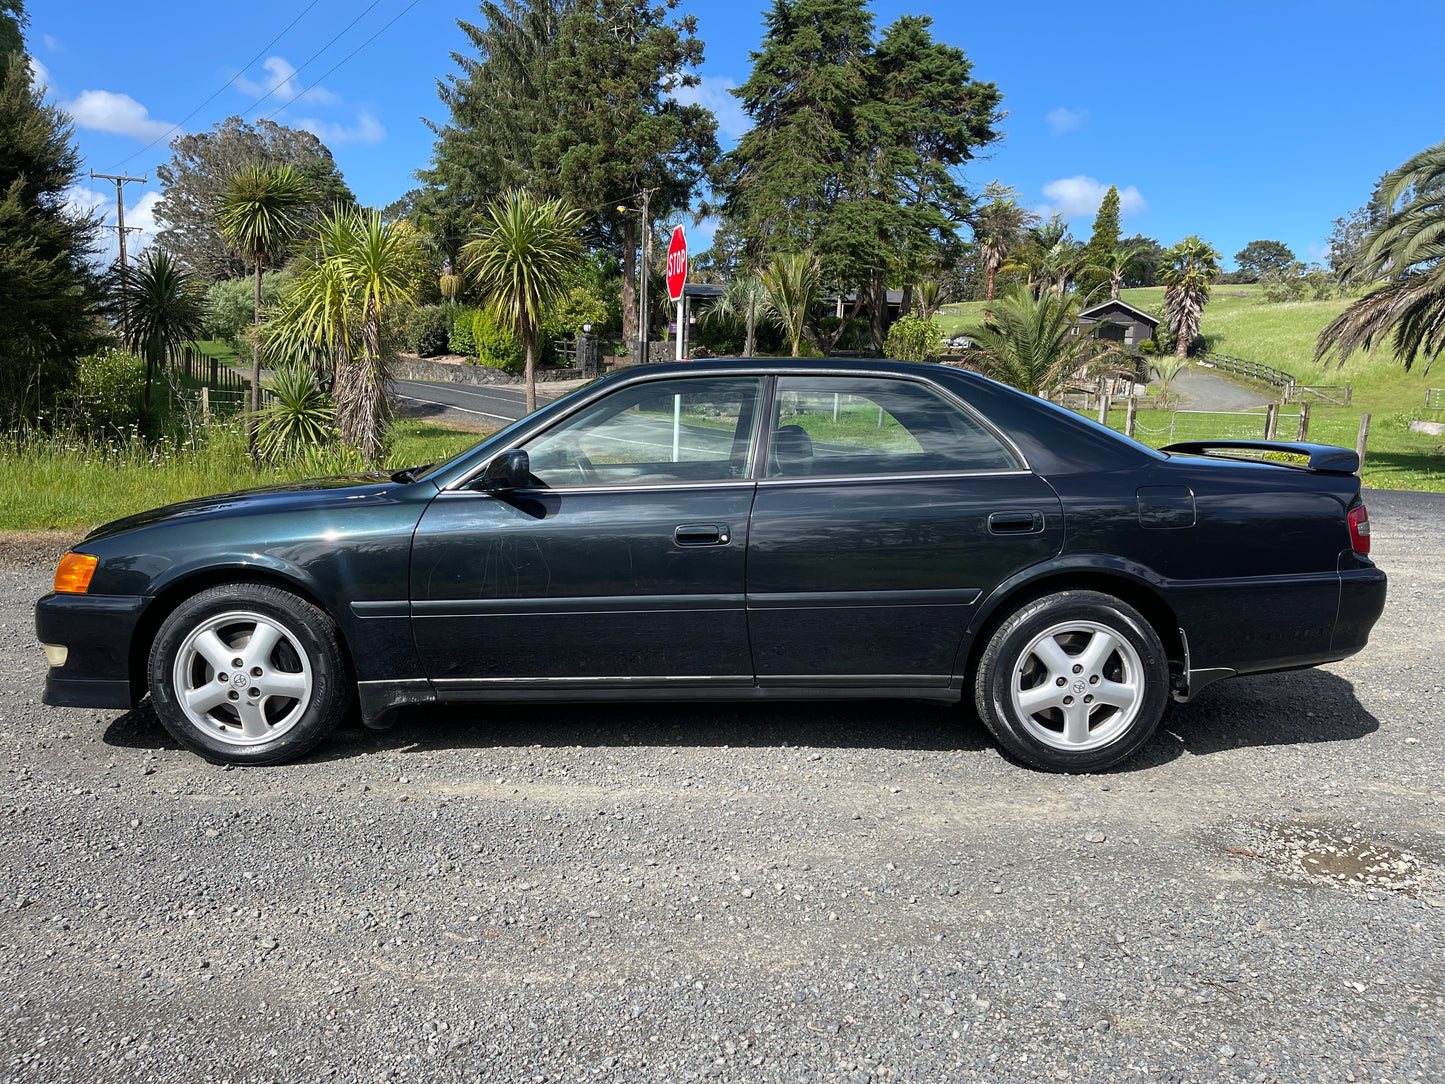 Toyota Chaser Factory Manual - 1998 Turbo